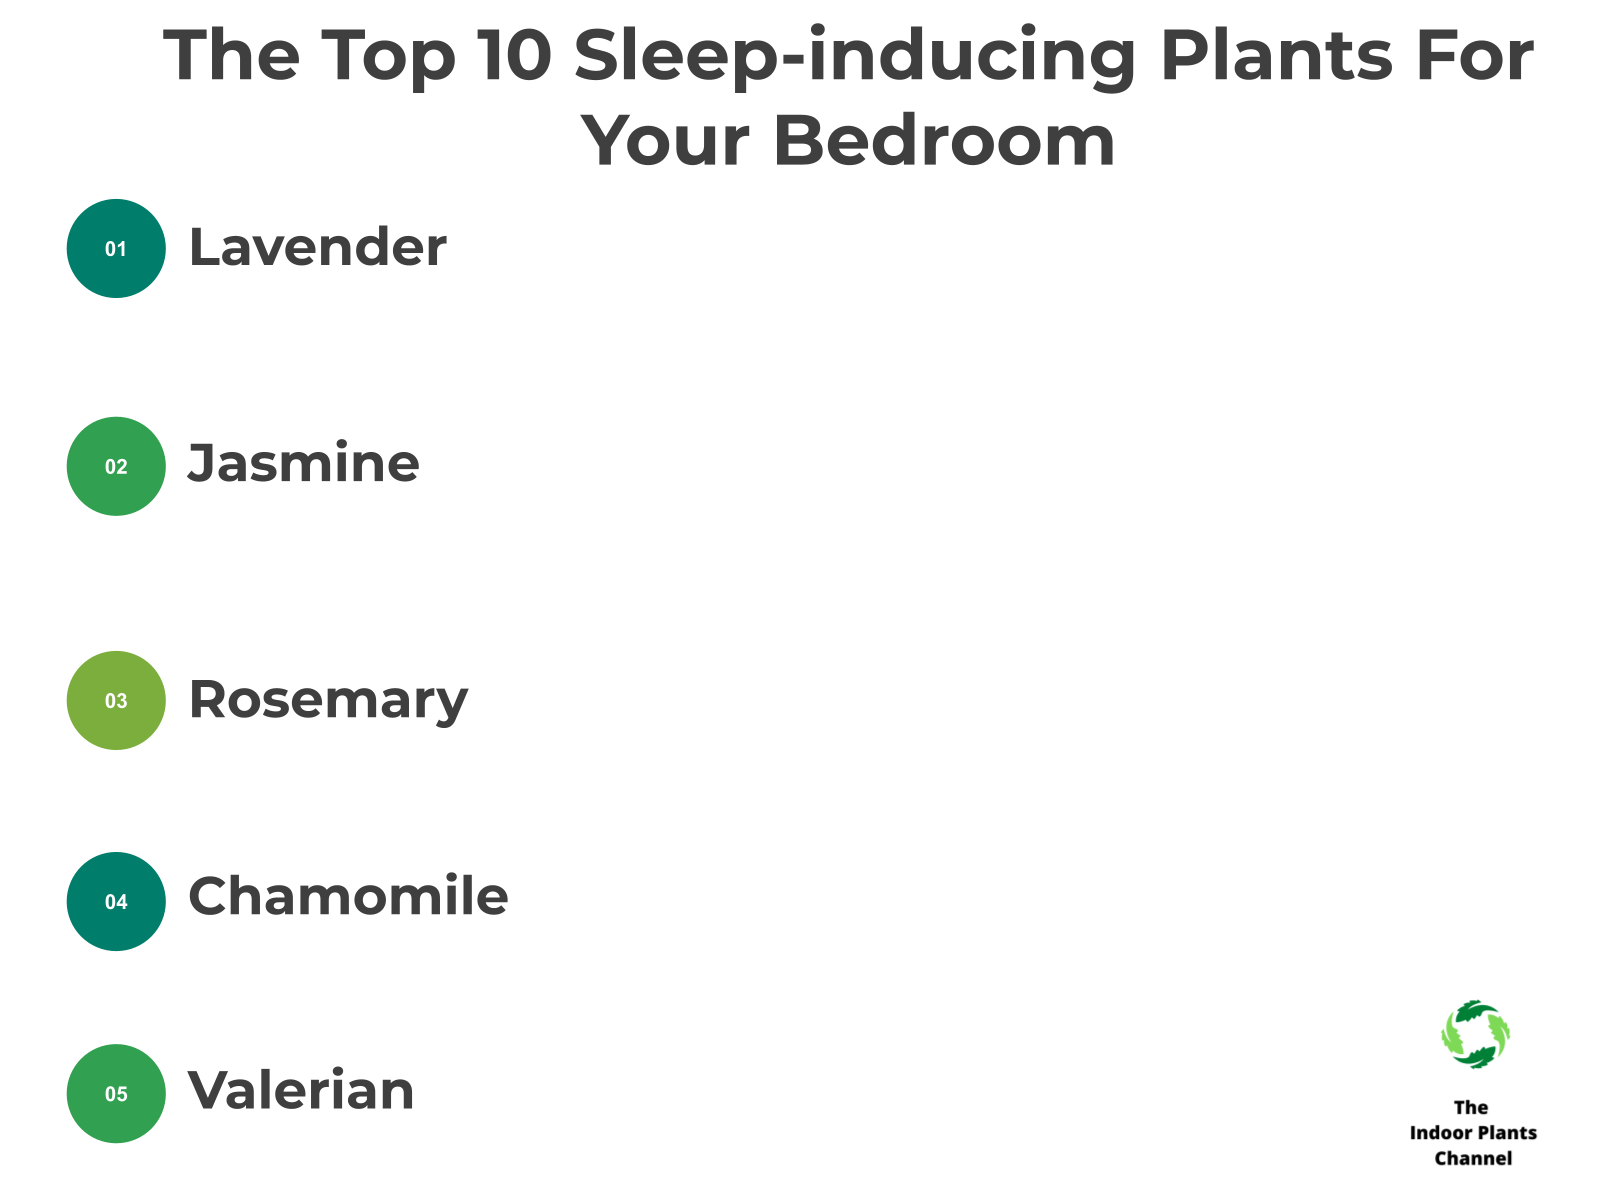 INFOGRAPHIC: The Top 10 Sleep-Inducing Plants for Your Bedroom